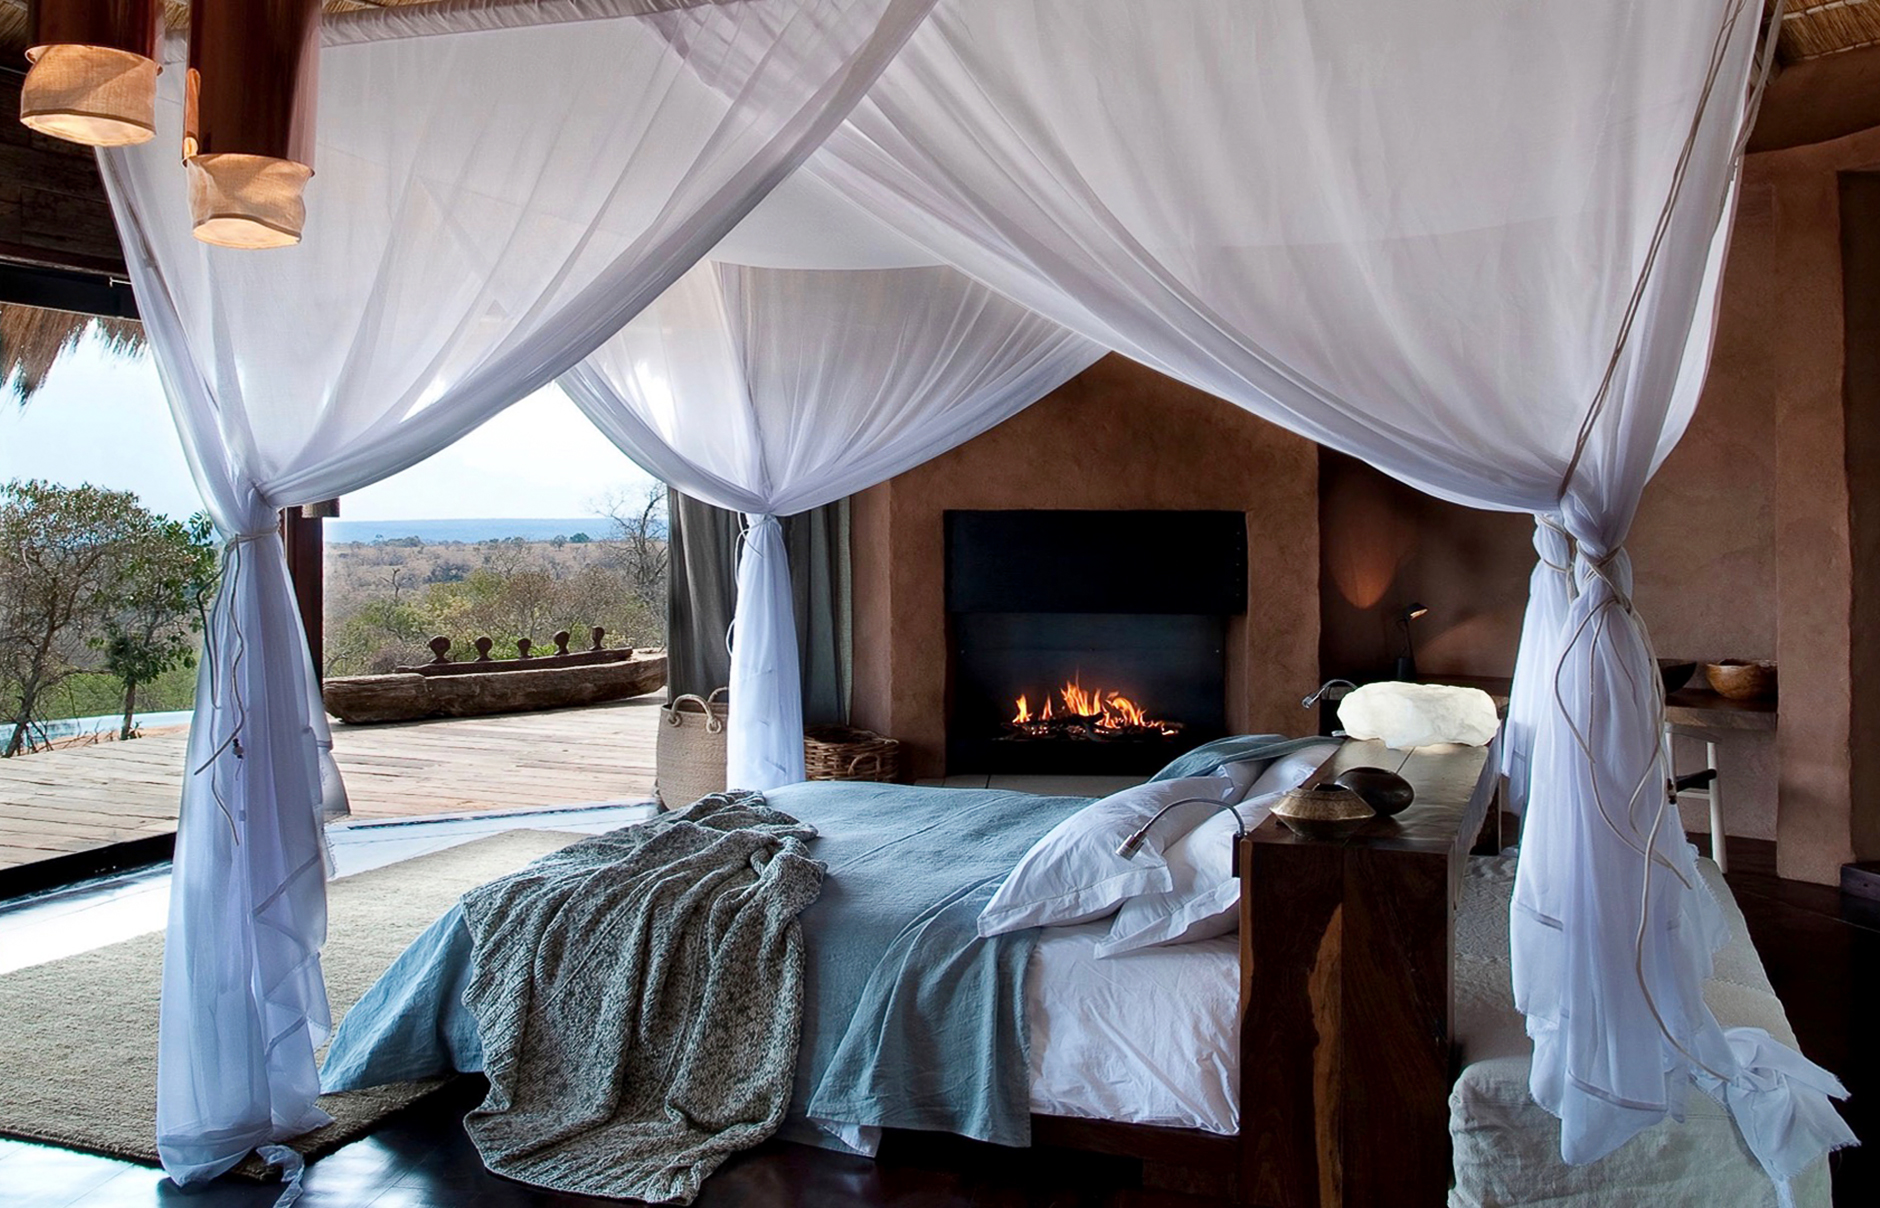 Leobo Private Reserve, South Africa • TravelPlusStyle.com